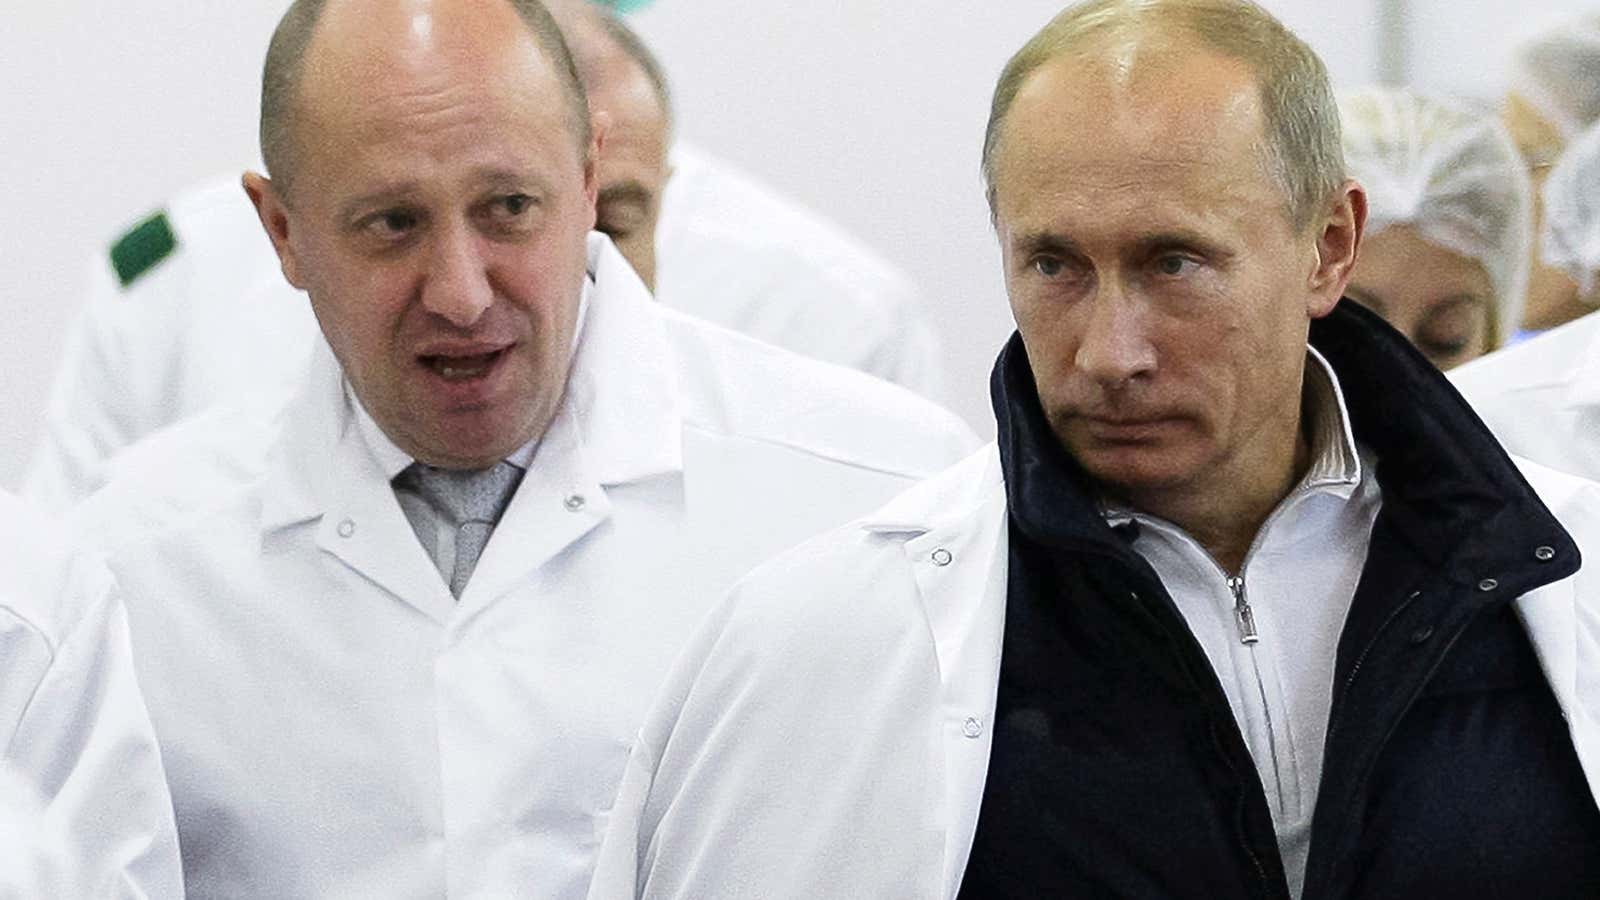 Yevgeny Prigozhin, left, owns the Internet Research Agency, which CNN linked to recent ads seemingly meant to inflame social divisions in the US. He’s shown with Russian President Vladimir Putin in 2010.